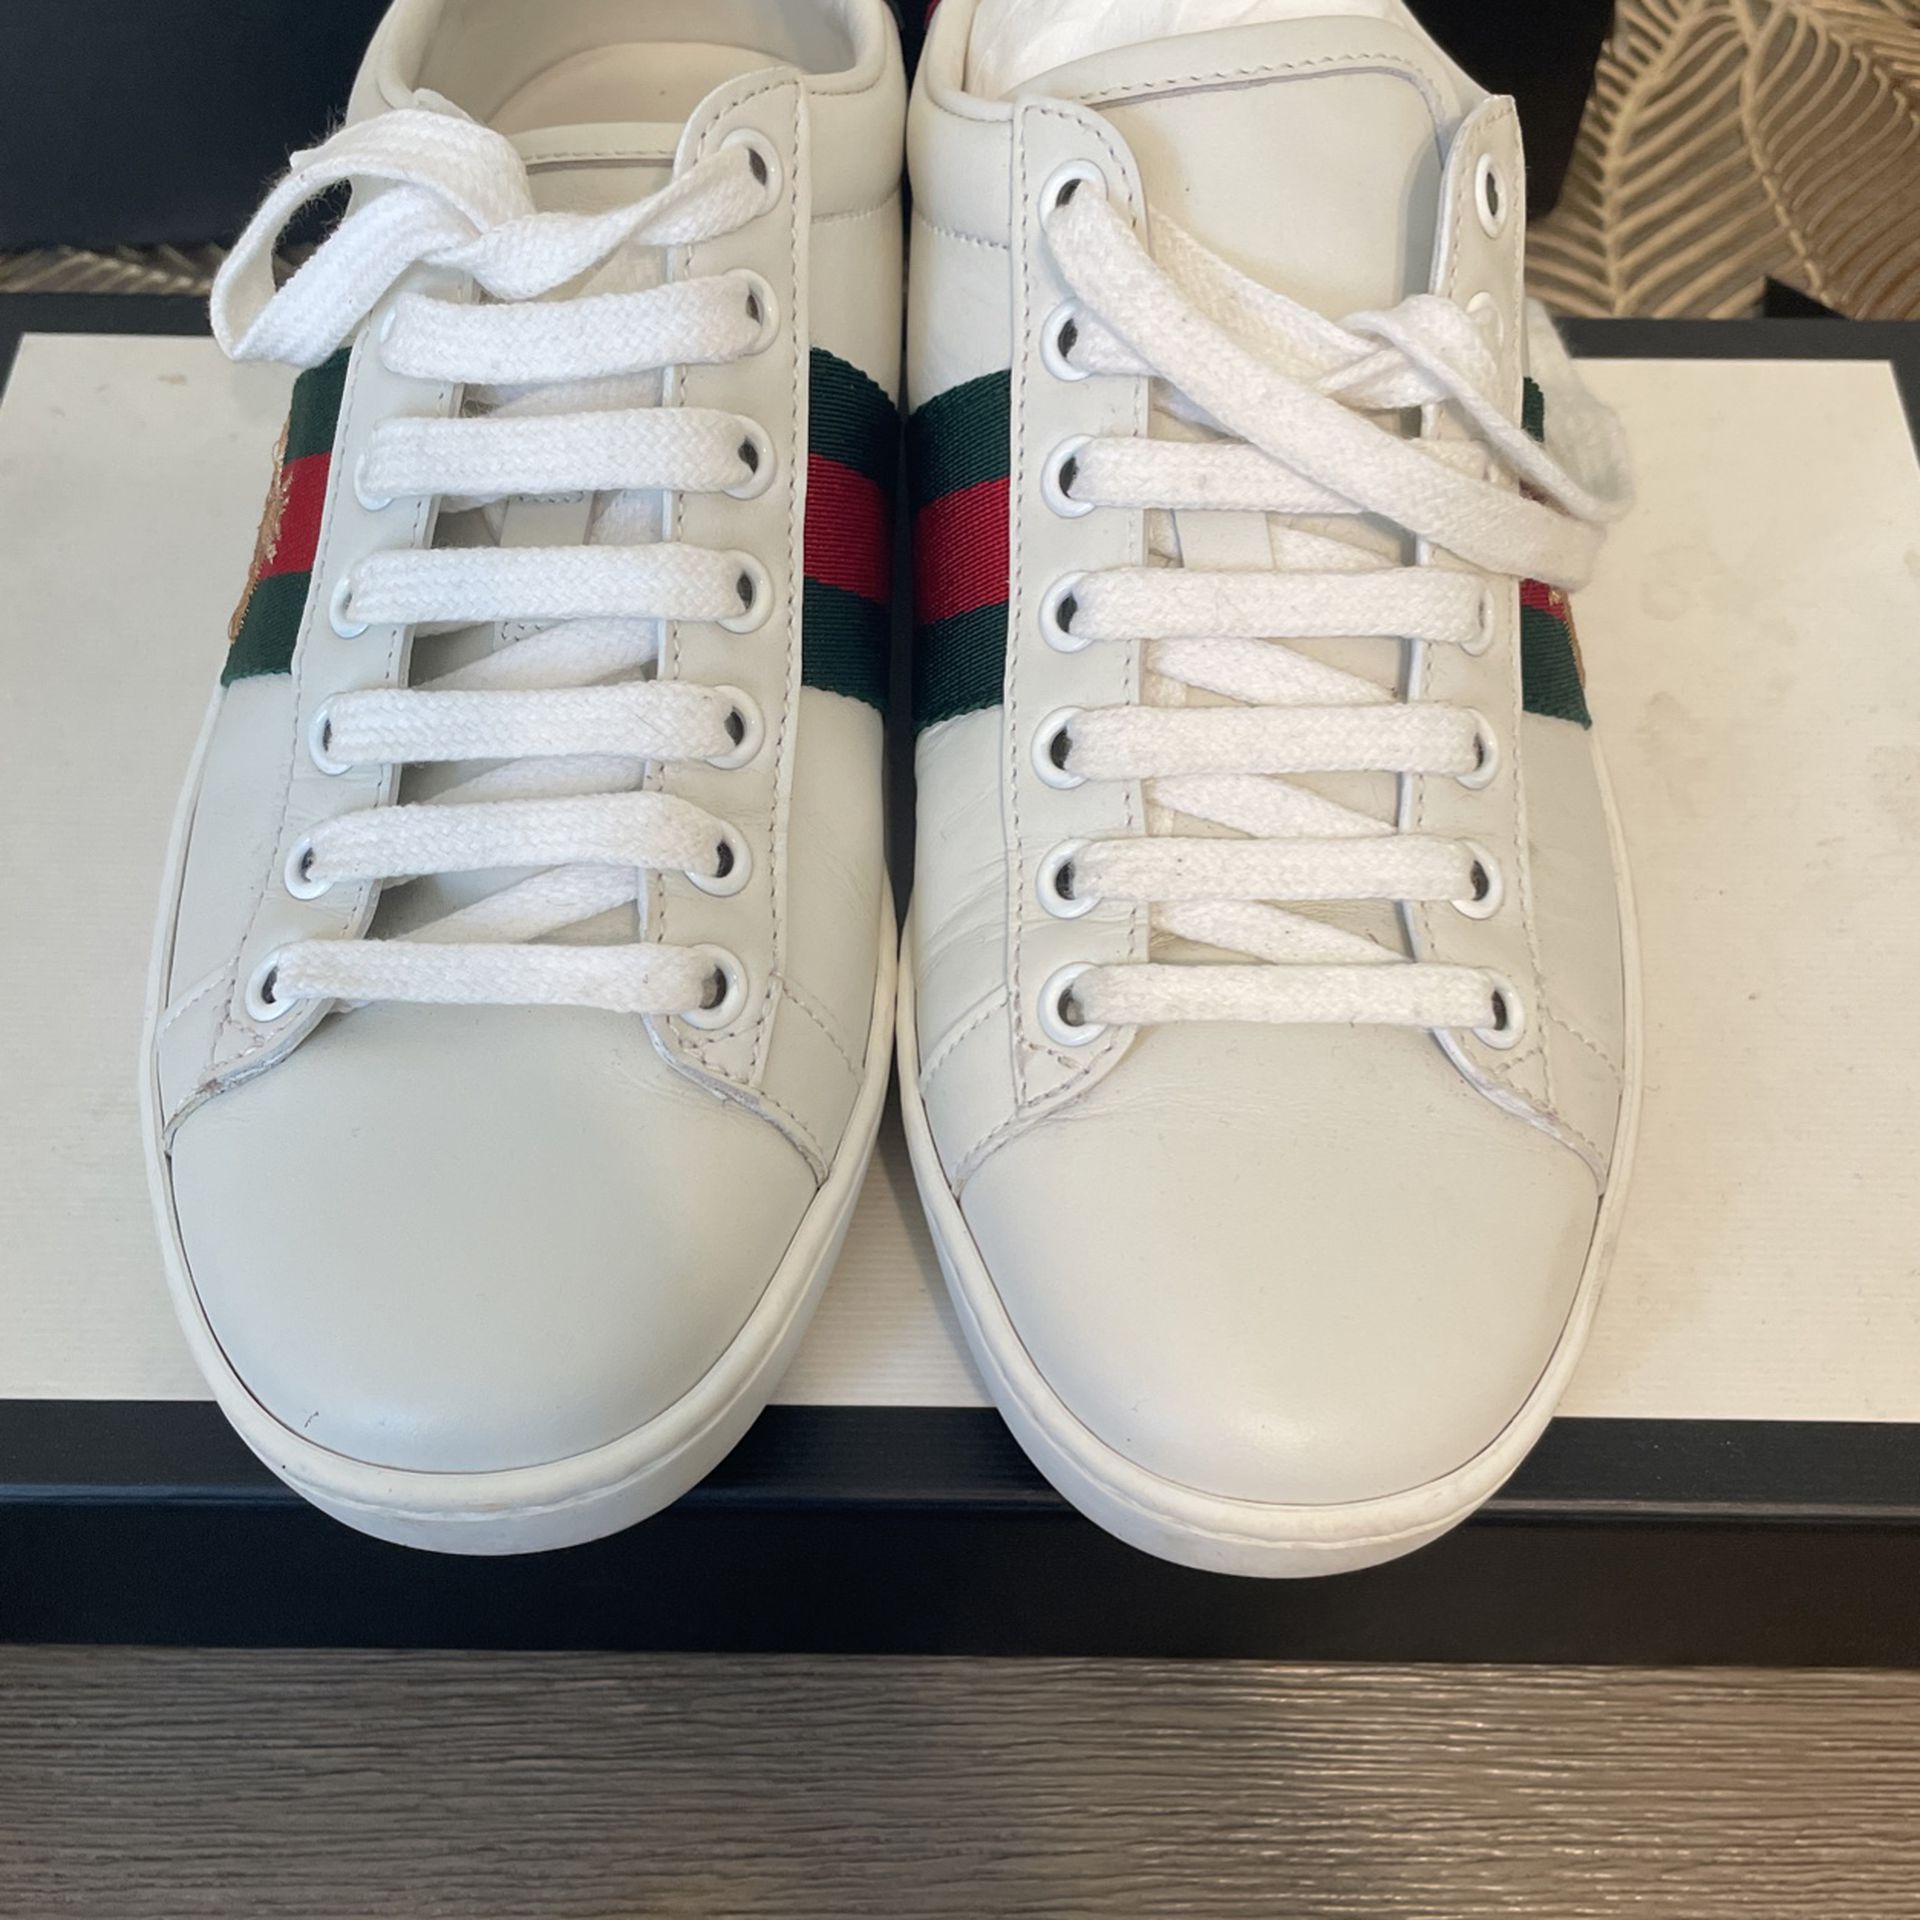 Fendi Match HighTop Sneakers In Turquoise New In Box for Sale in Upr  Montclair, NJ - OfferUp